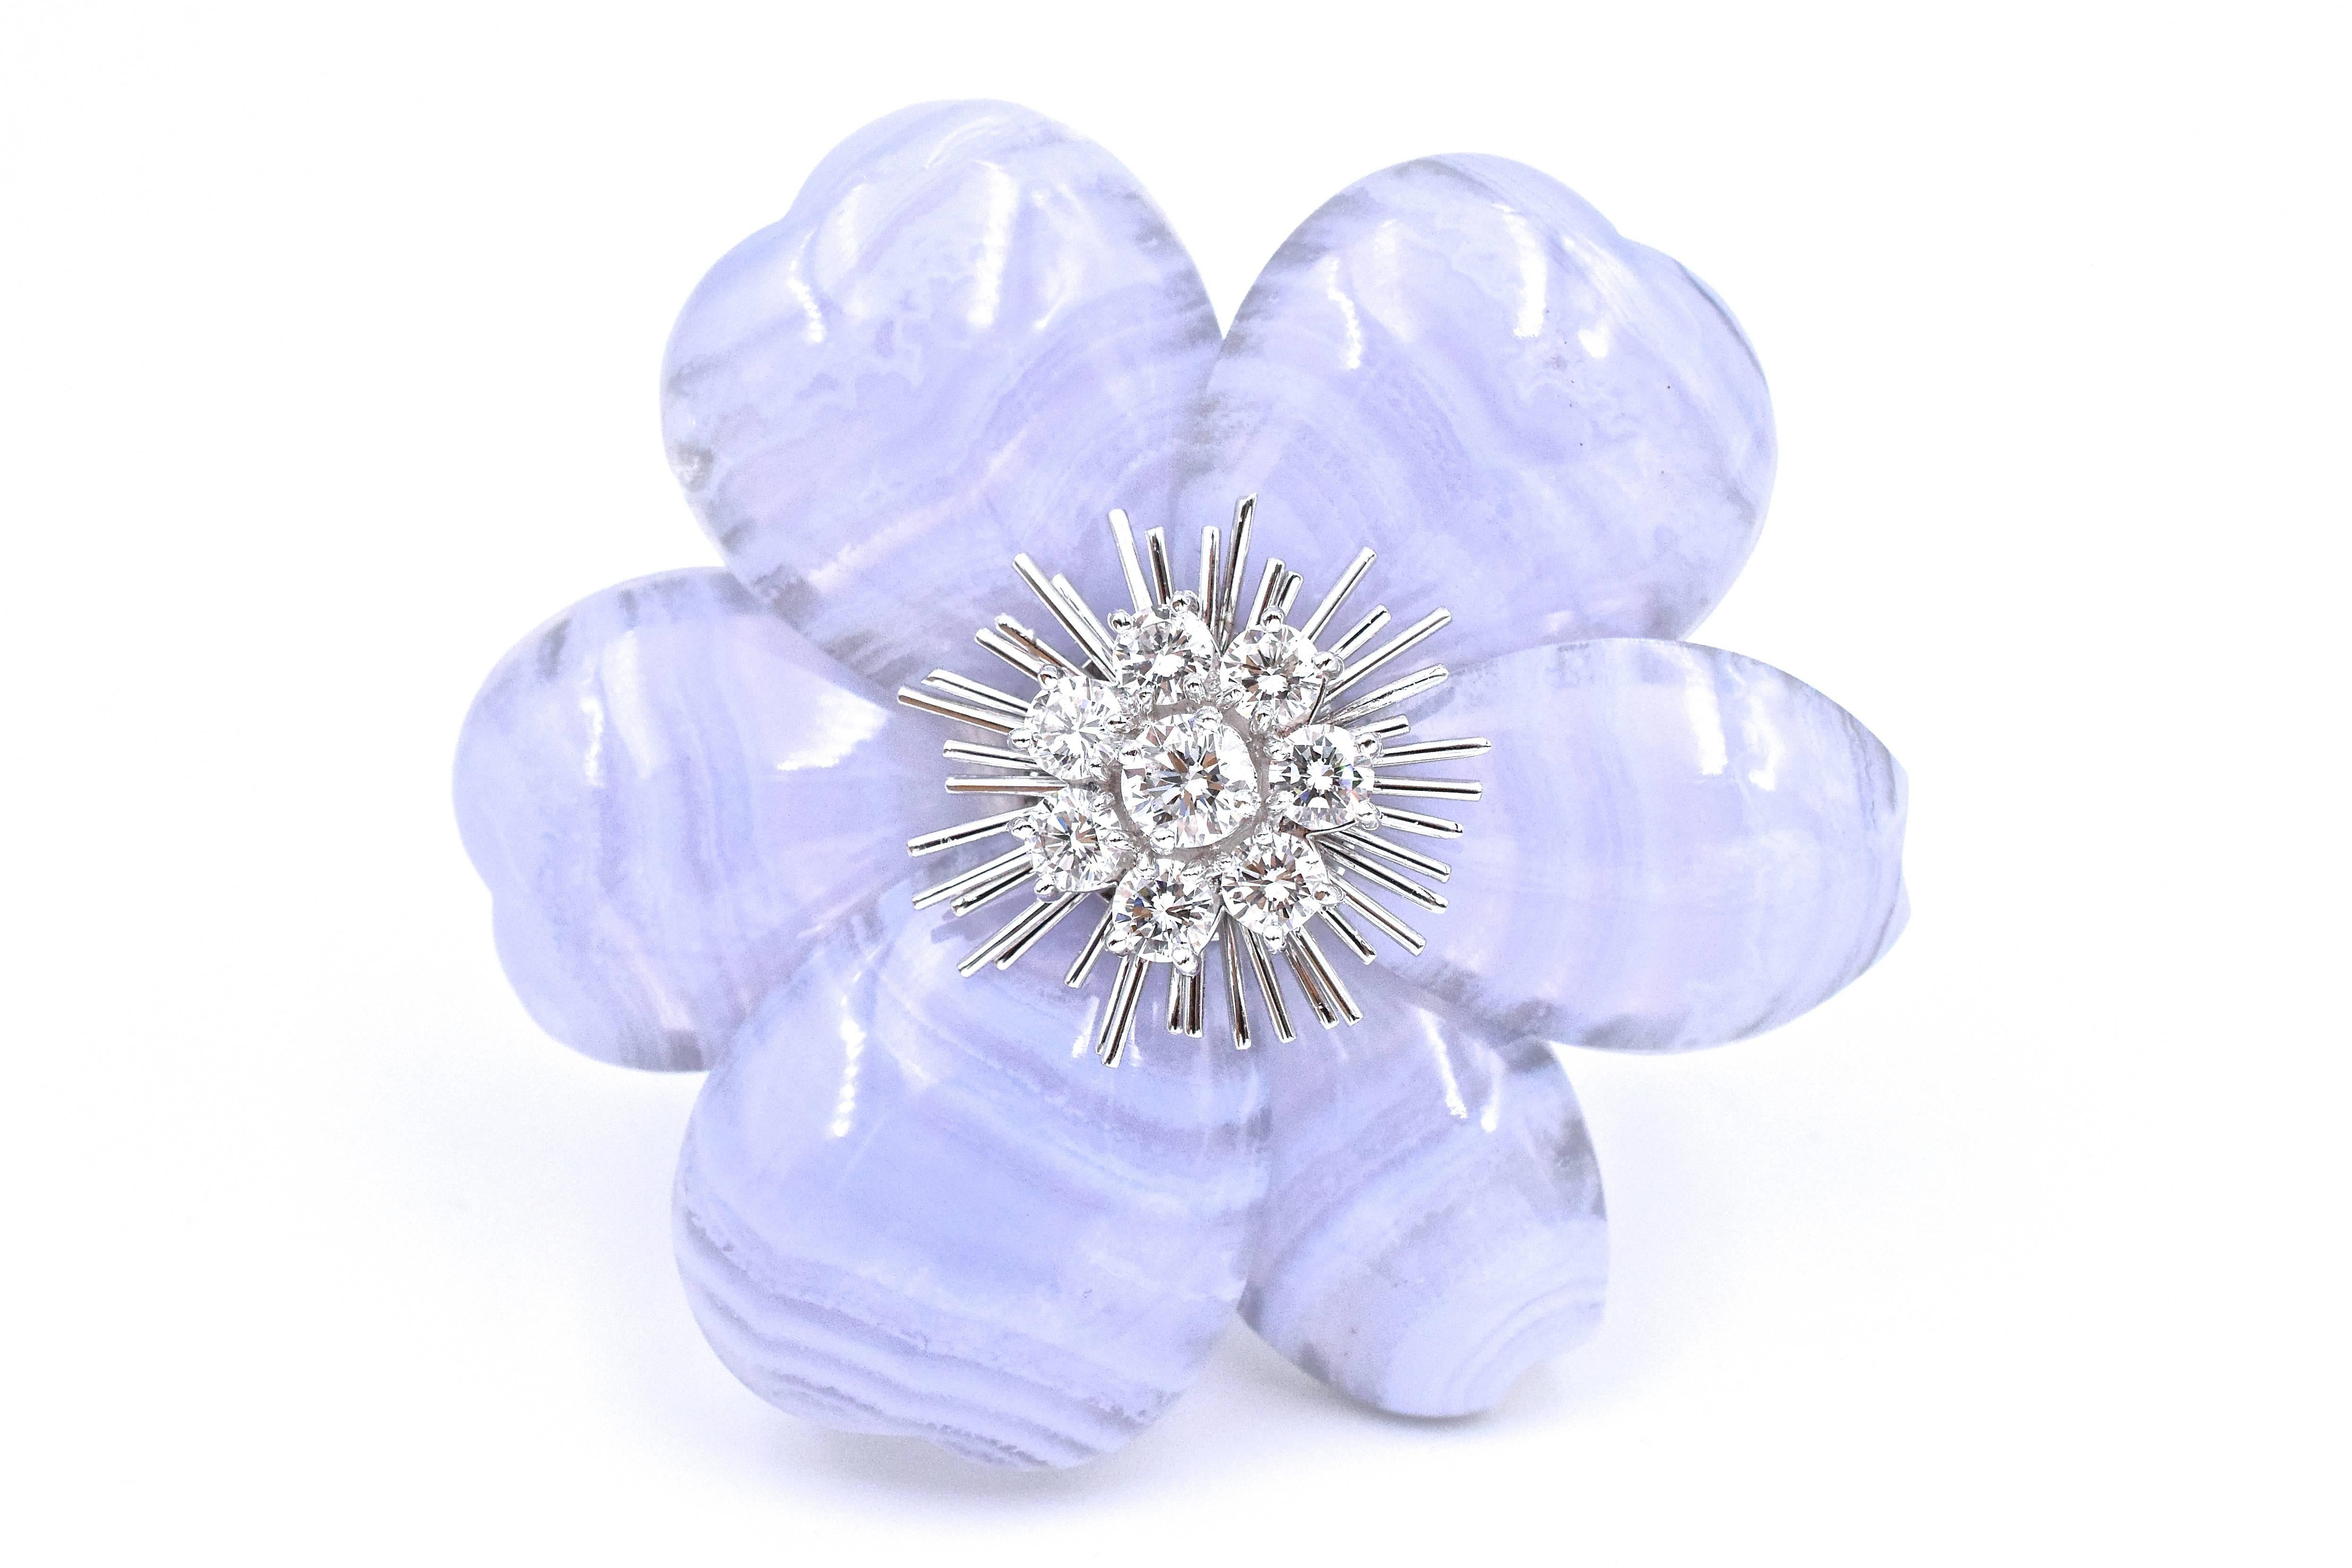 
Van Cleef and Arpels  chalcedony and diamond brooch/necklace.
 The brooch has 8 round diamonds forming a center cluster with 6 